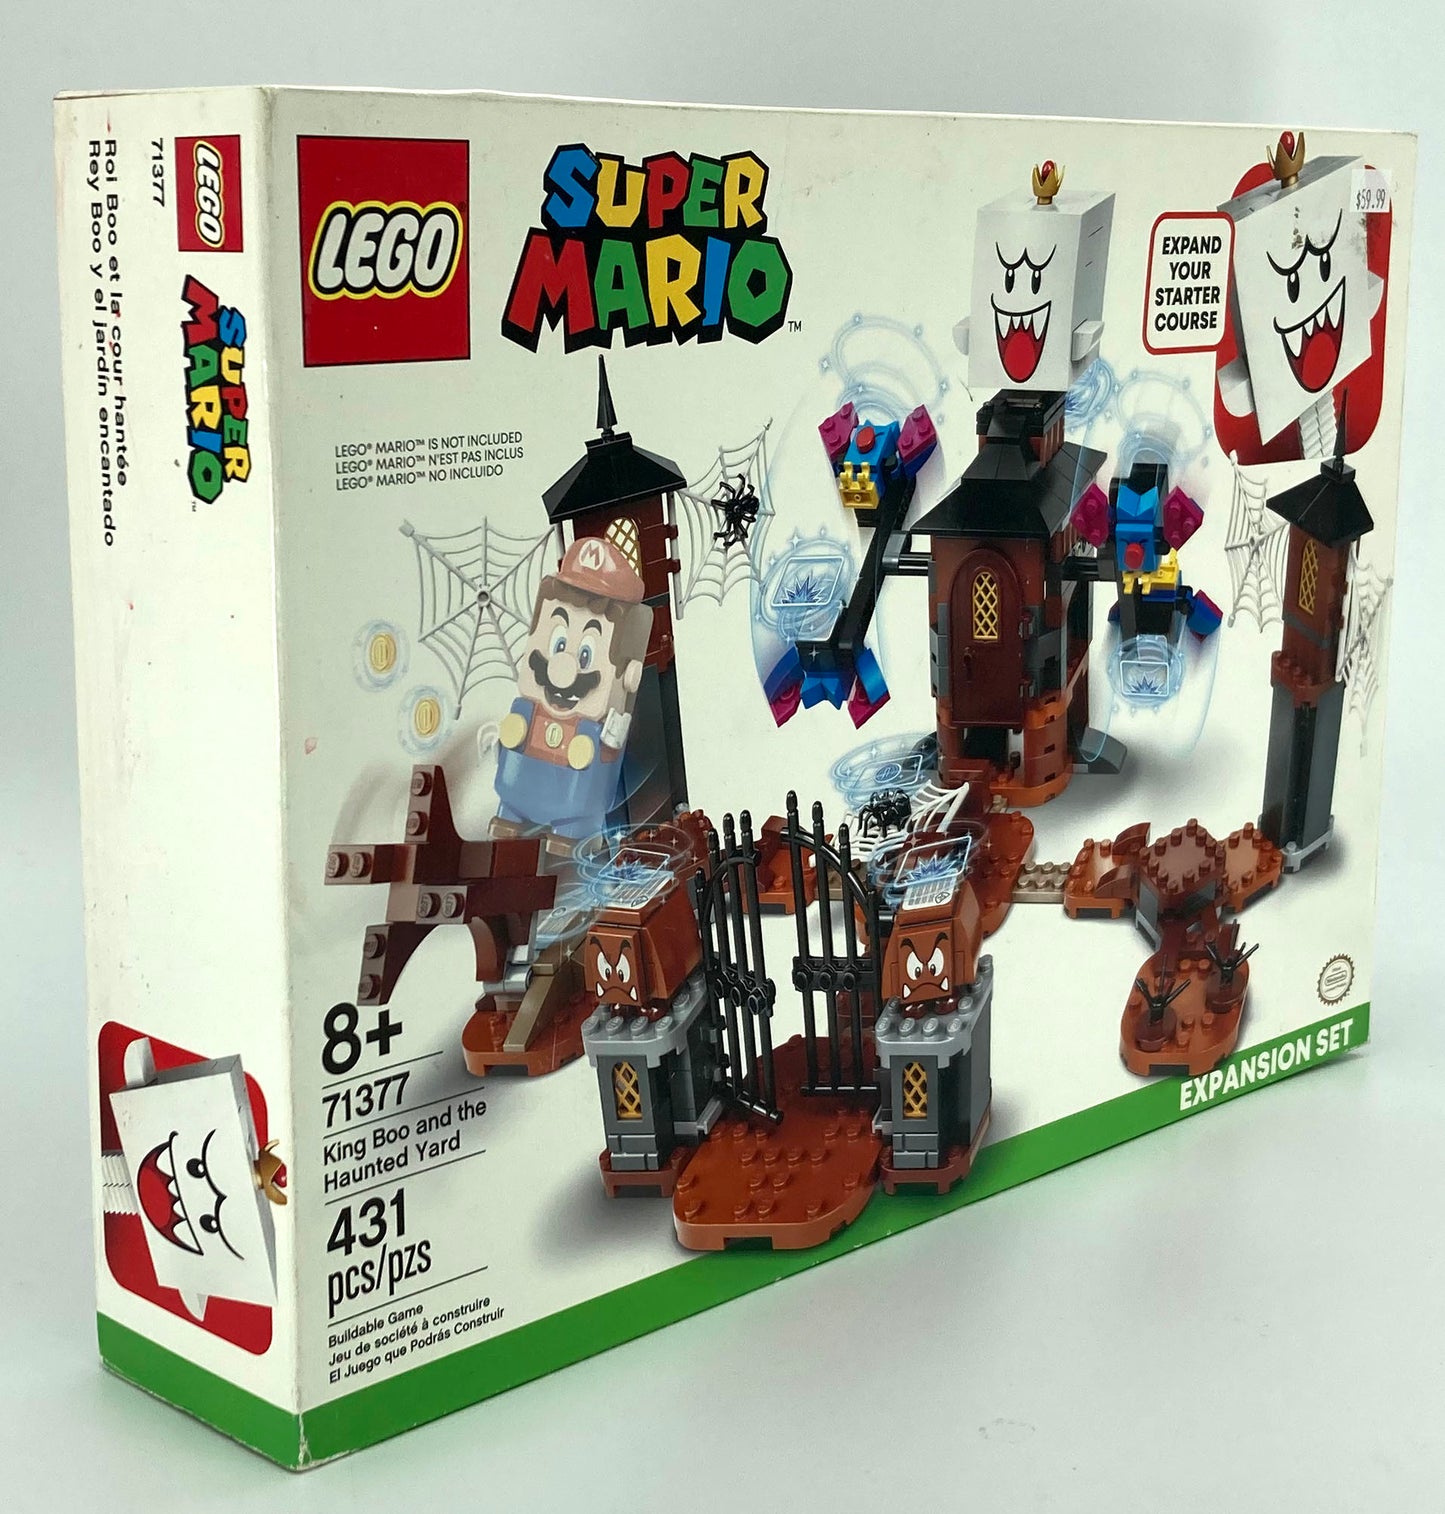 71377 King Boo and the Haunted Yard (RETIRED SET)